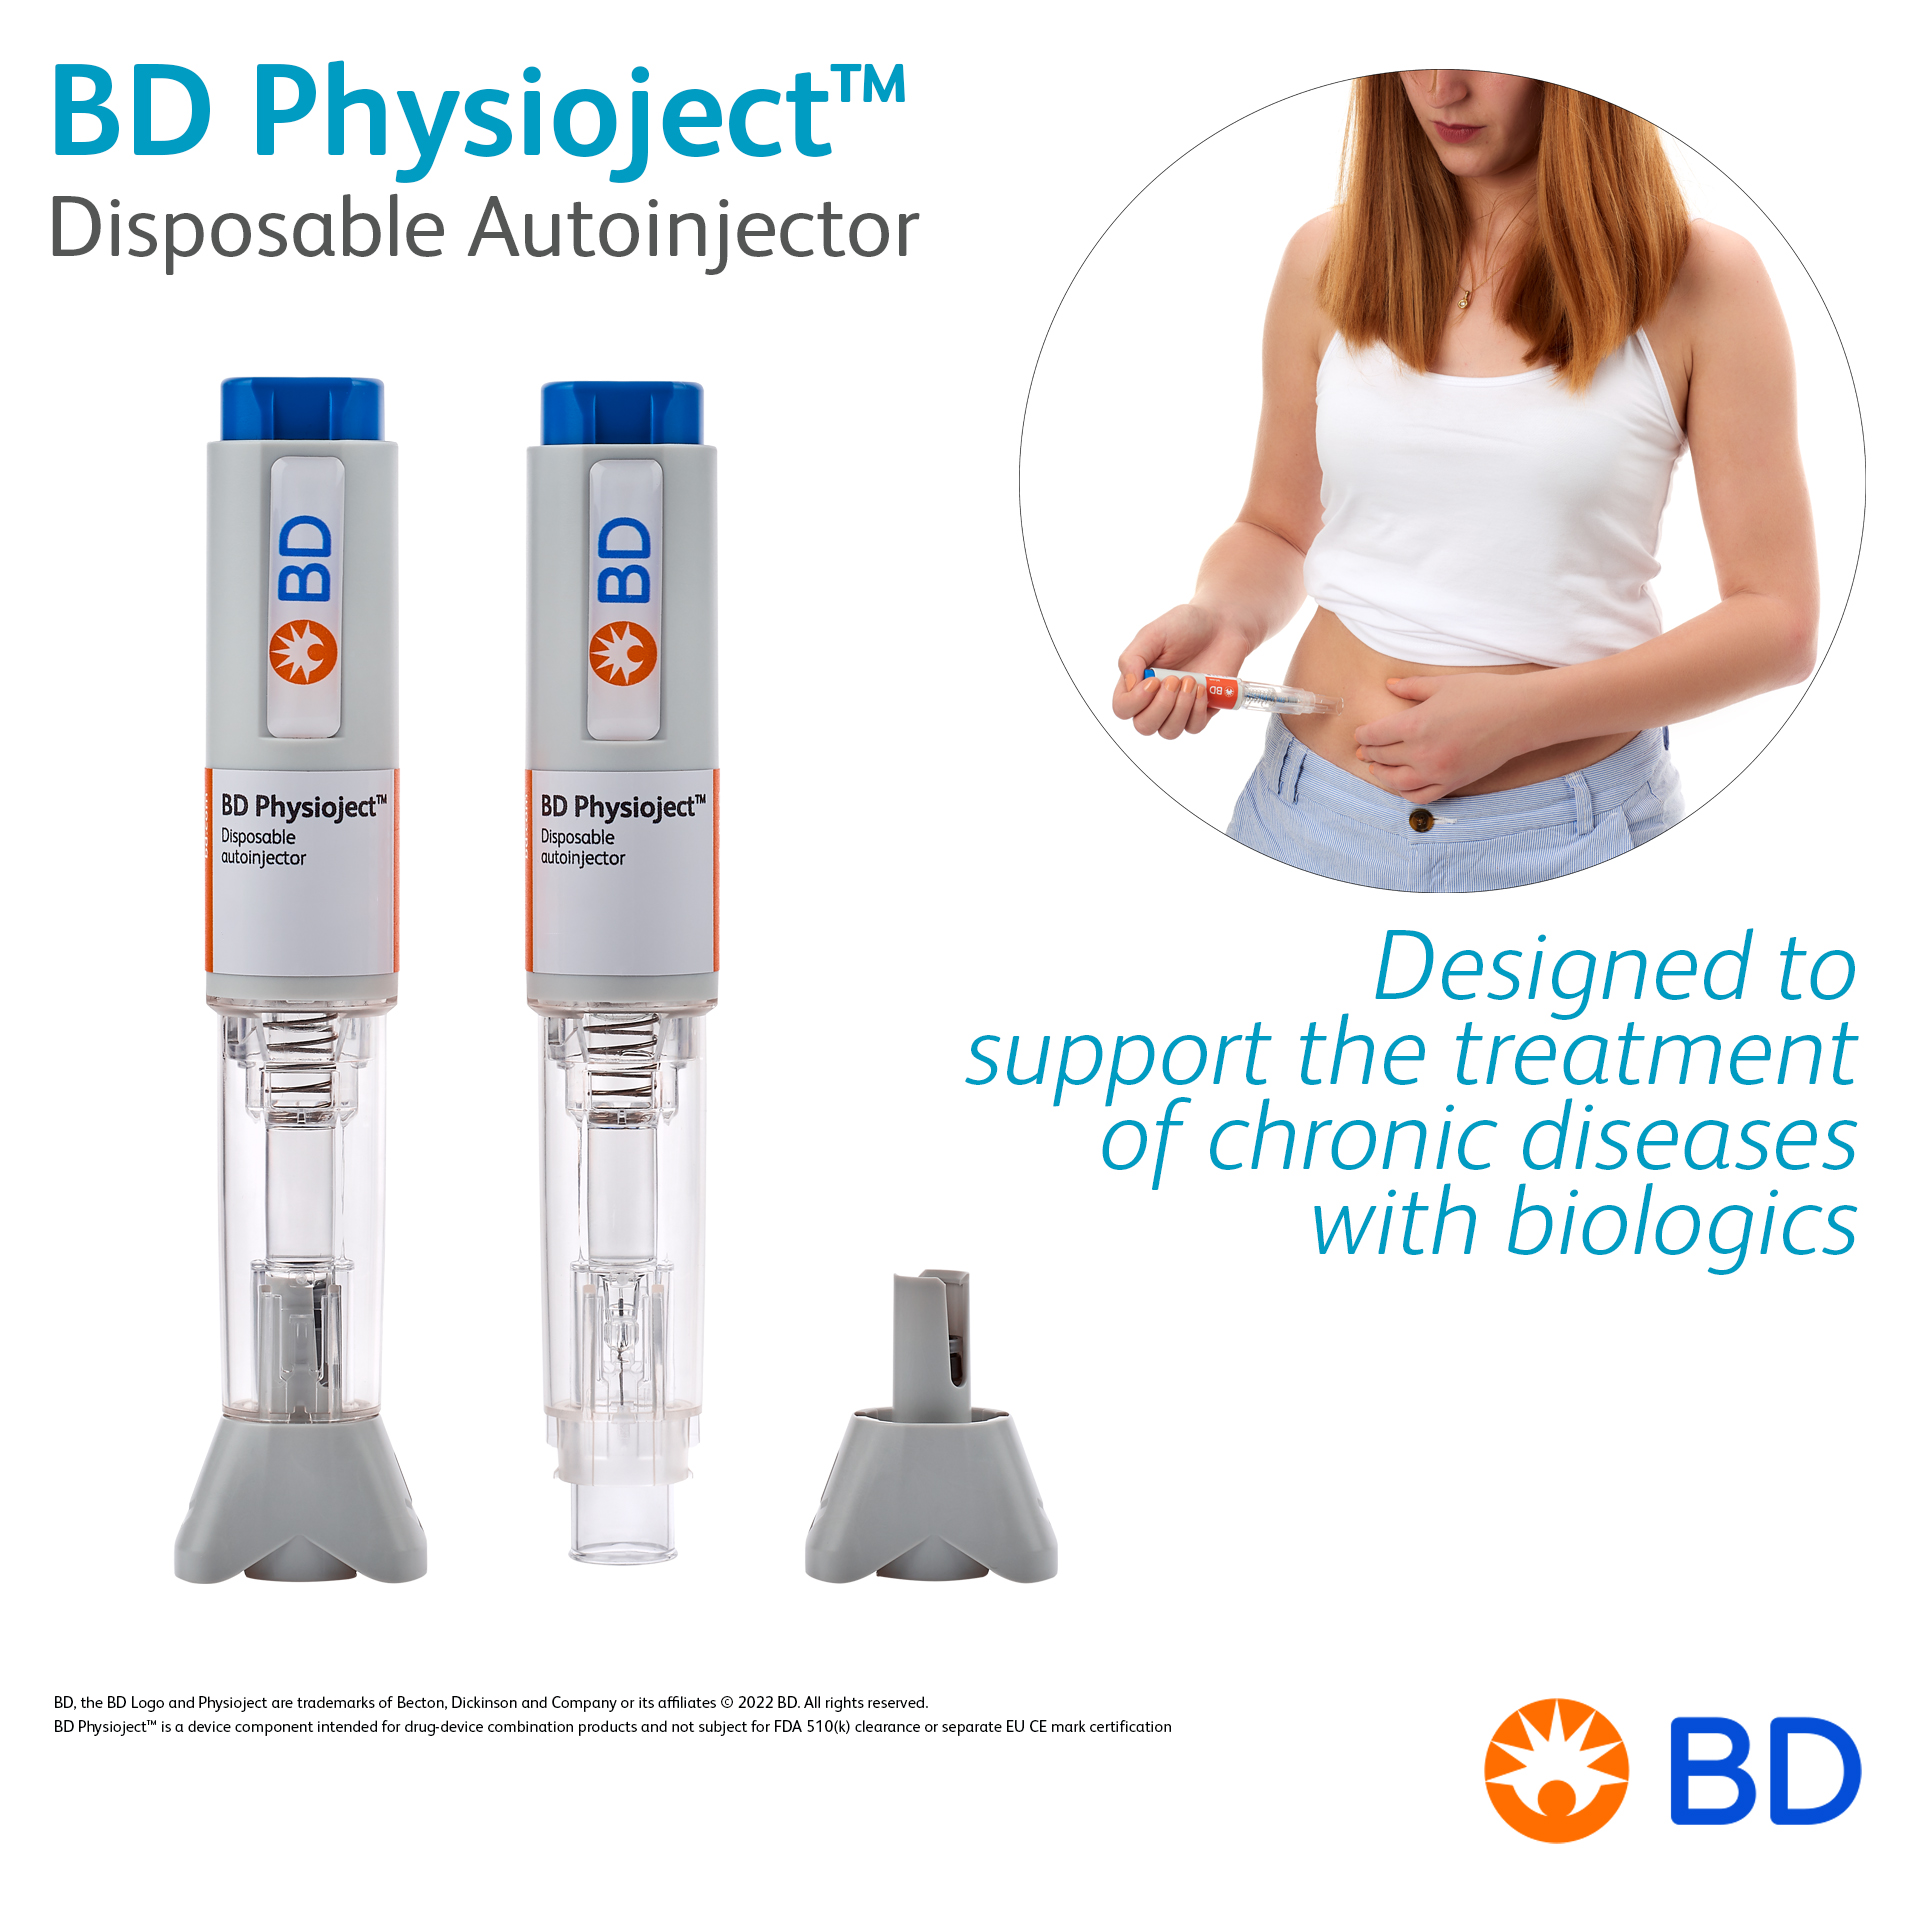 BD Physioject™ Disposable Autoinjector - Designed to support the treatment of chronic diseases with biologics